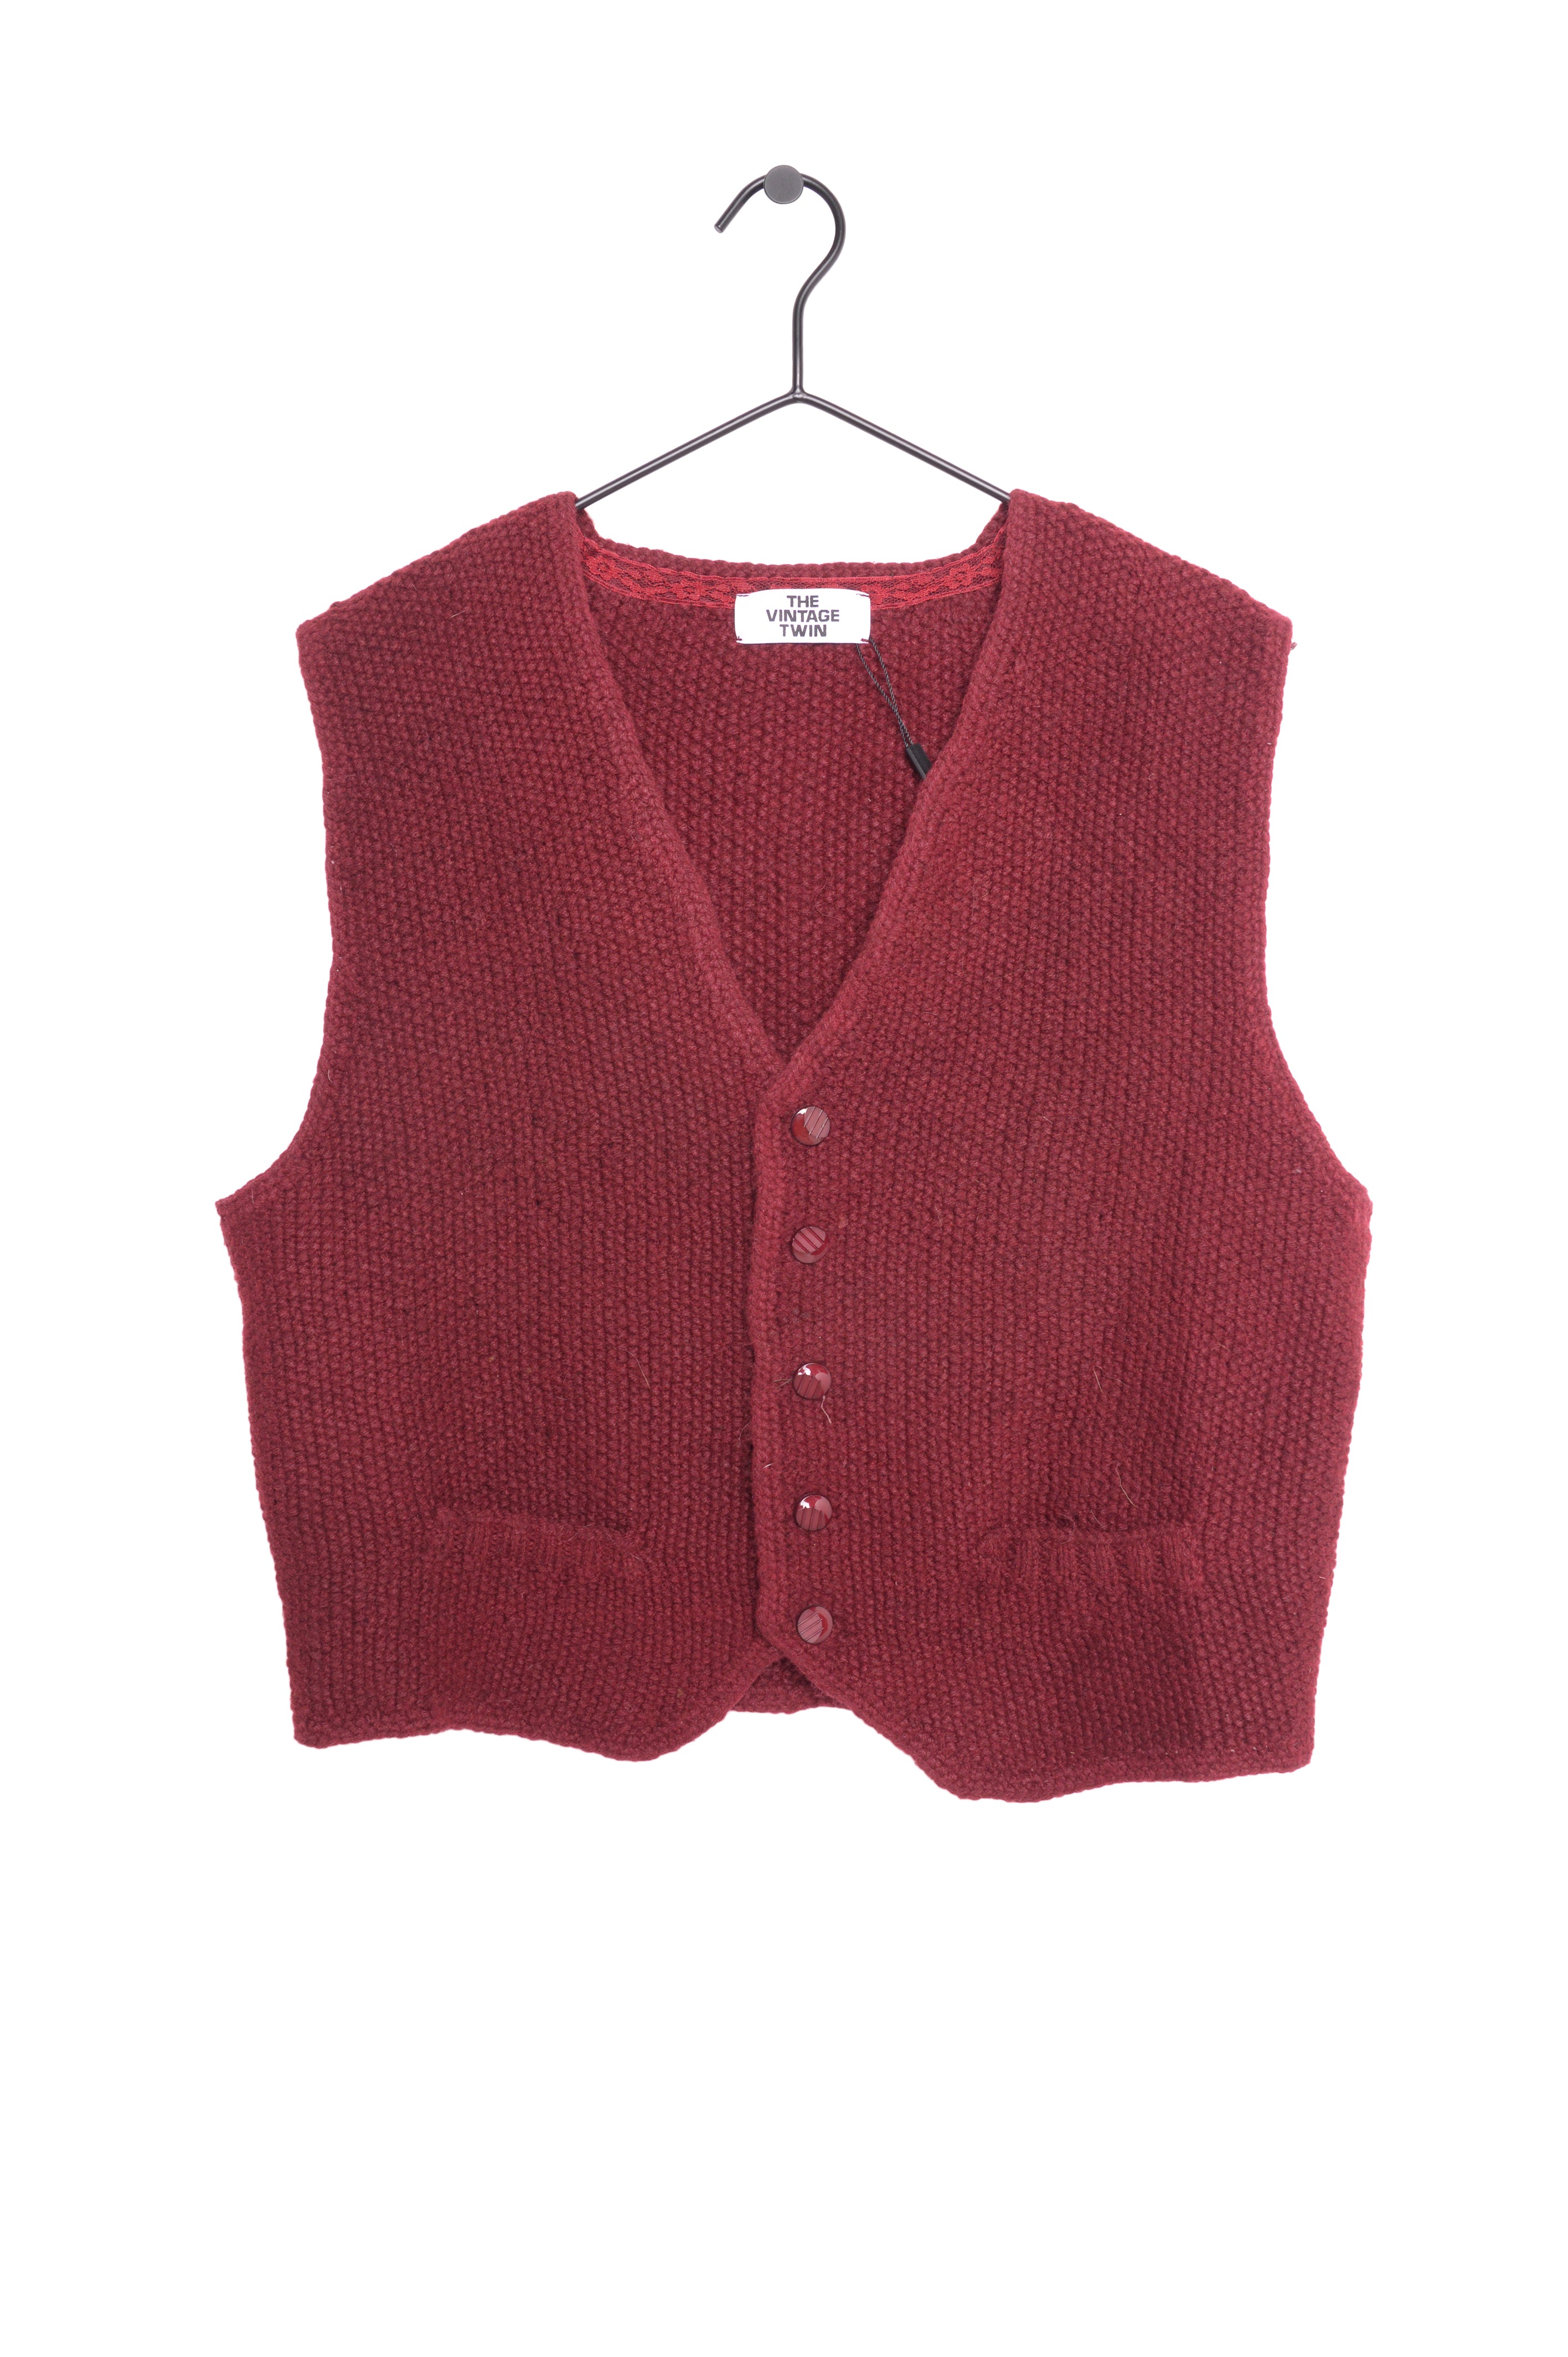 1960s Hand Knit Sweater Vest Free Shipping - The Vintage Twin